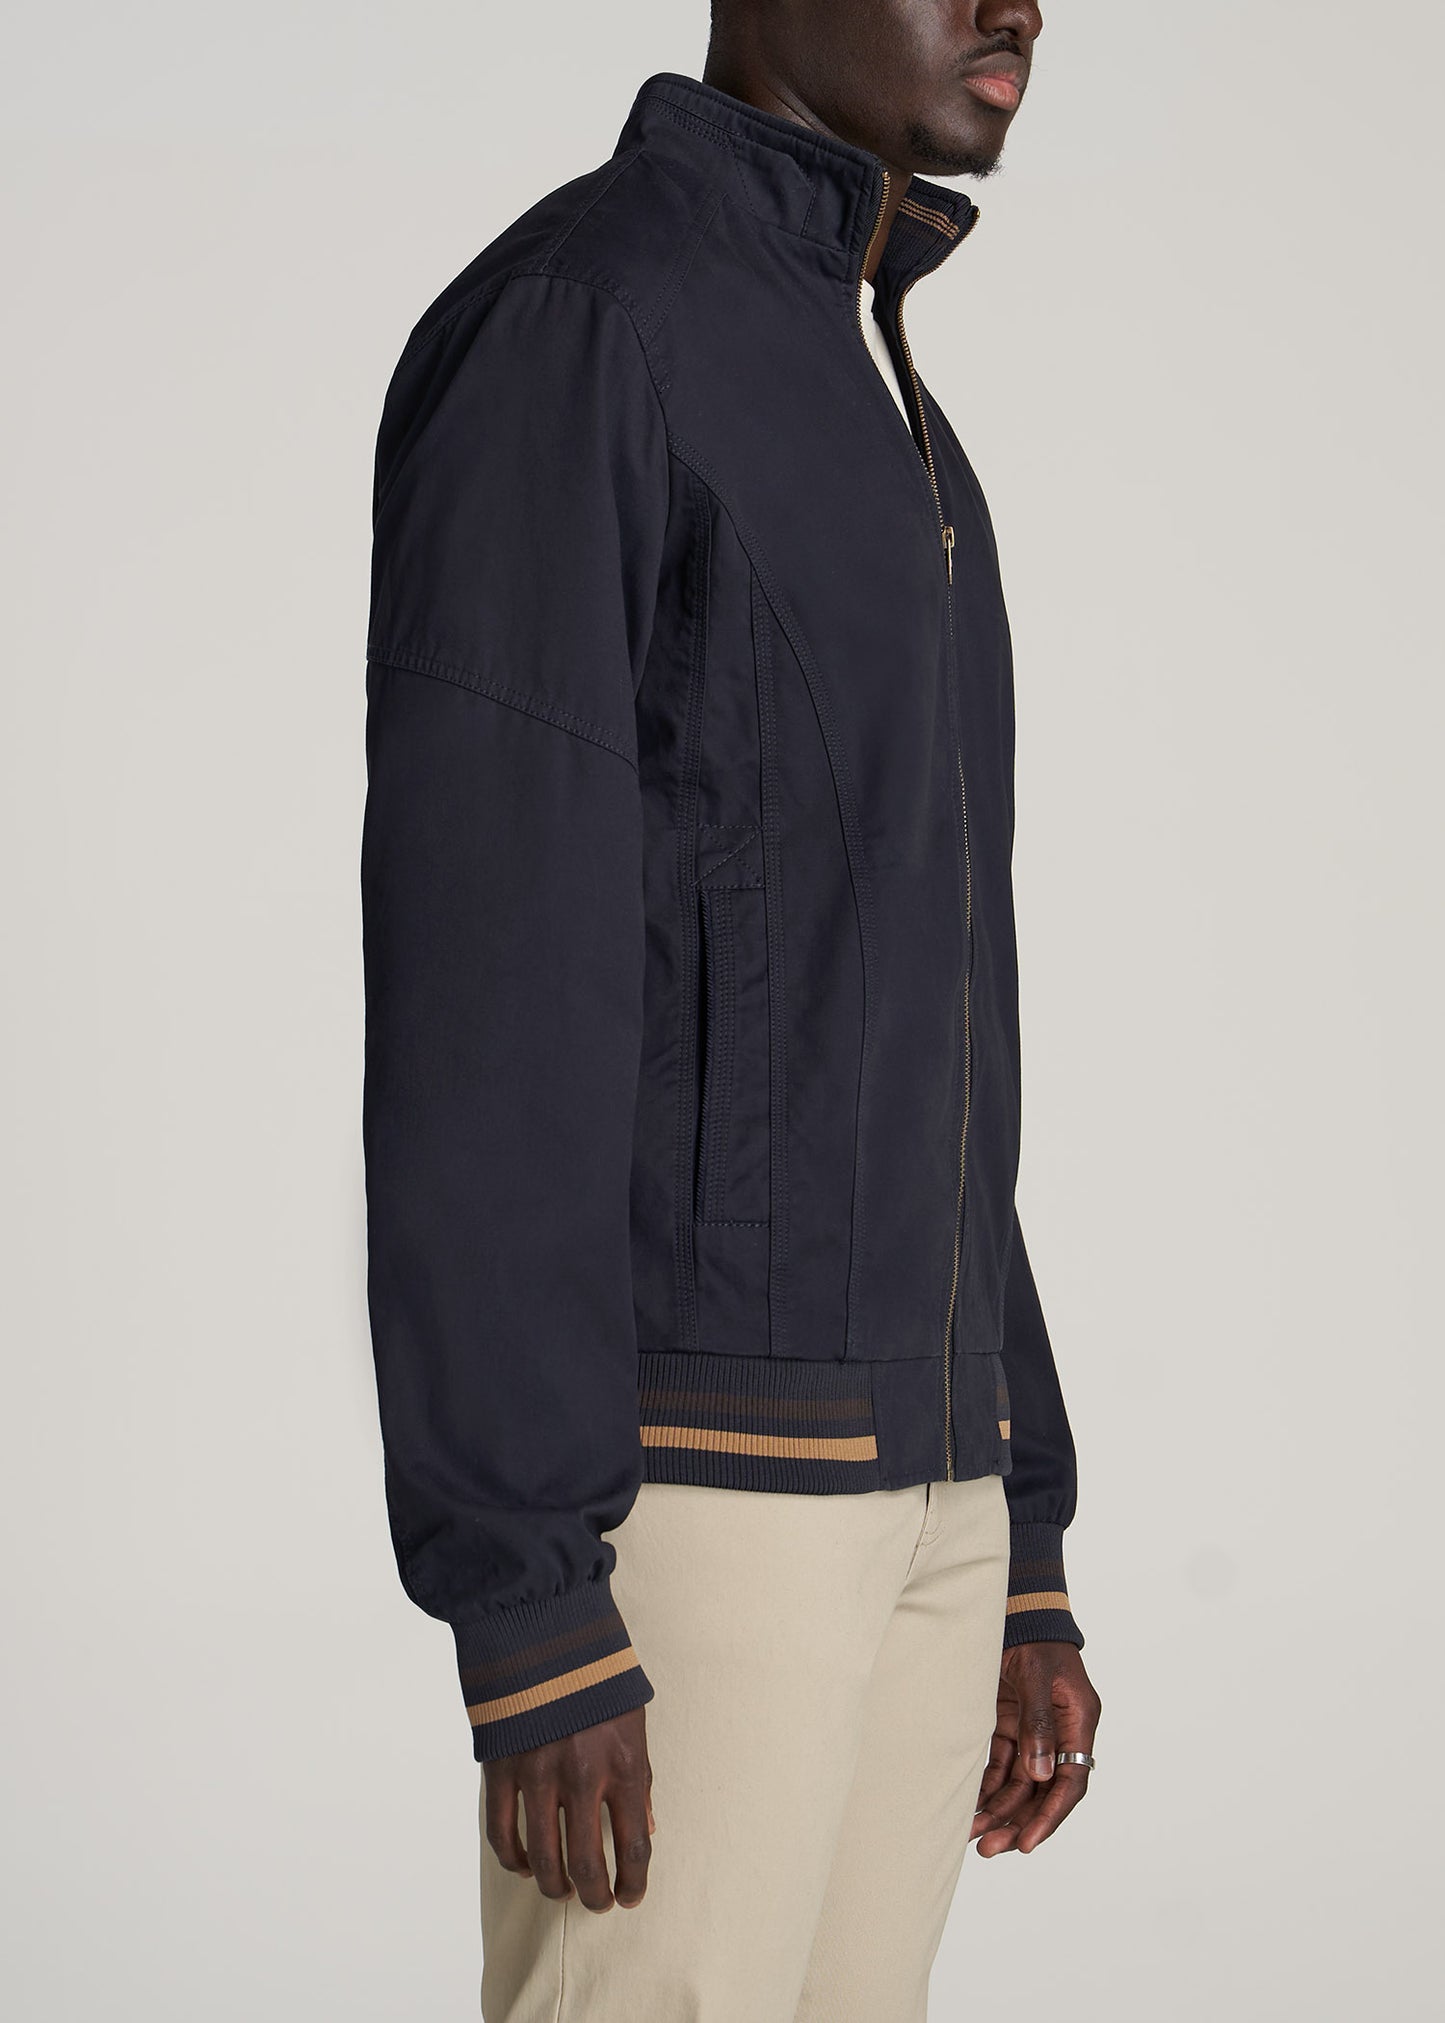       American-Tall-Men-Cotton-Bomber-Jacket-Salute-Navy-side